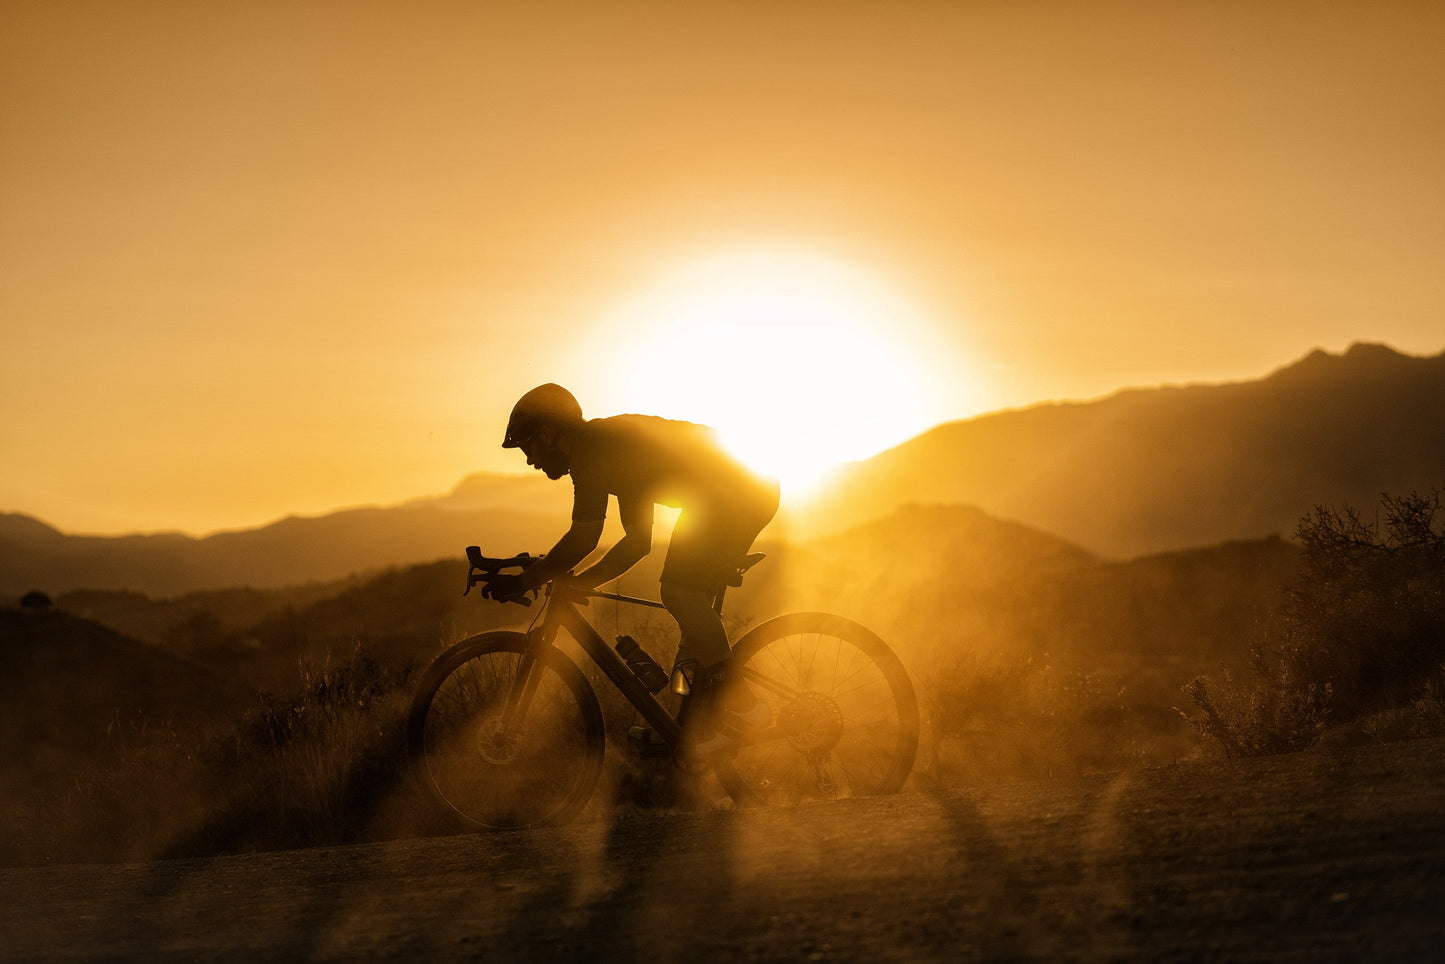 Mondraker Dusty Gravel electric bike Man riding at sunset with dust in the air